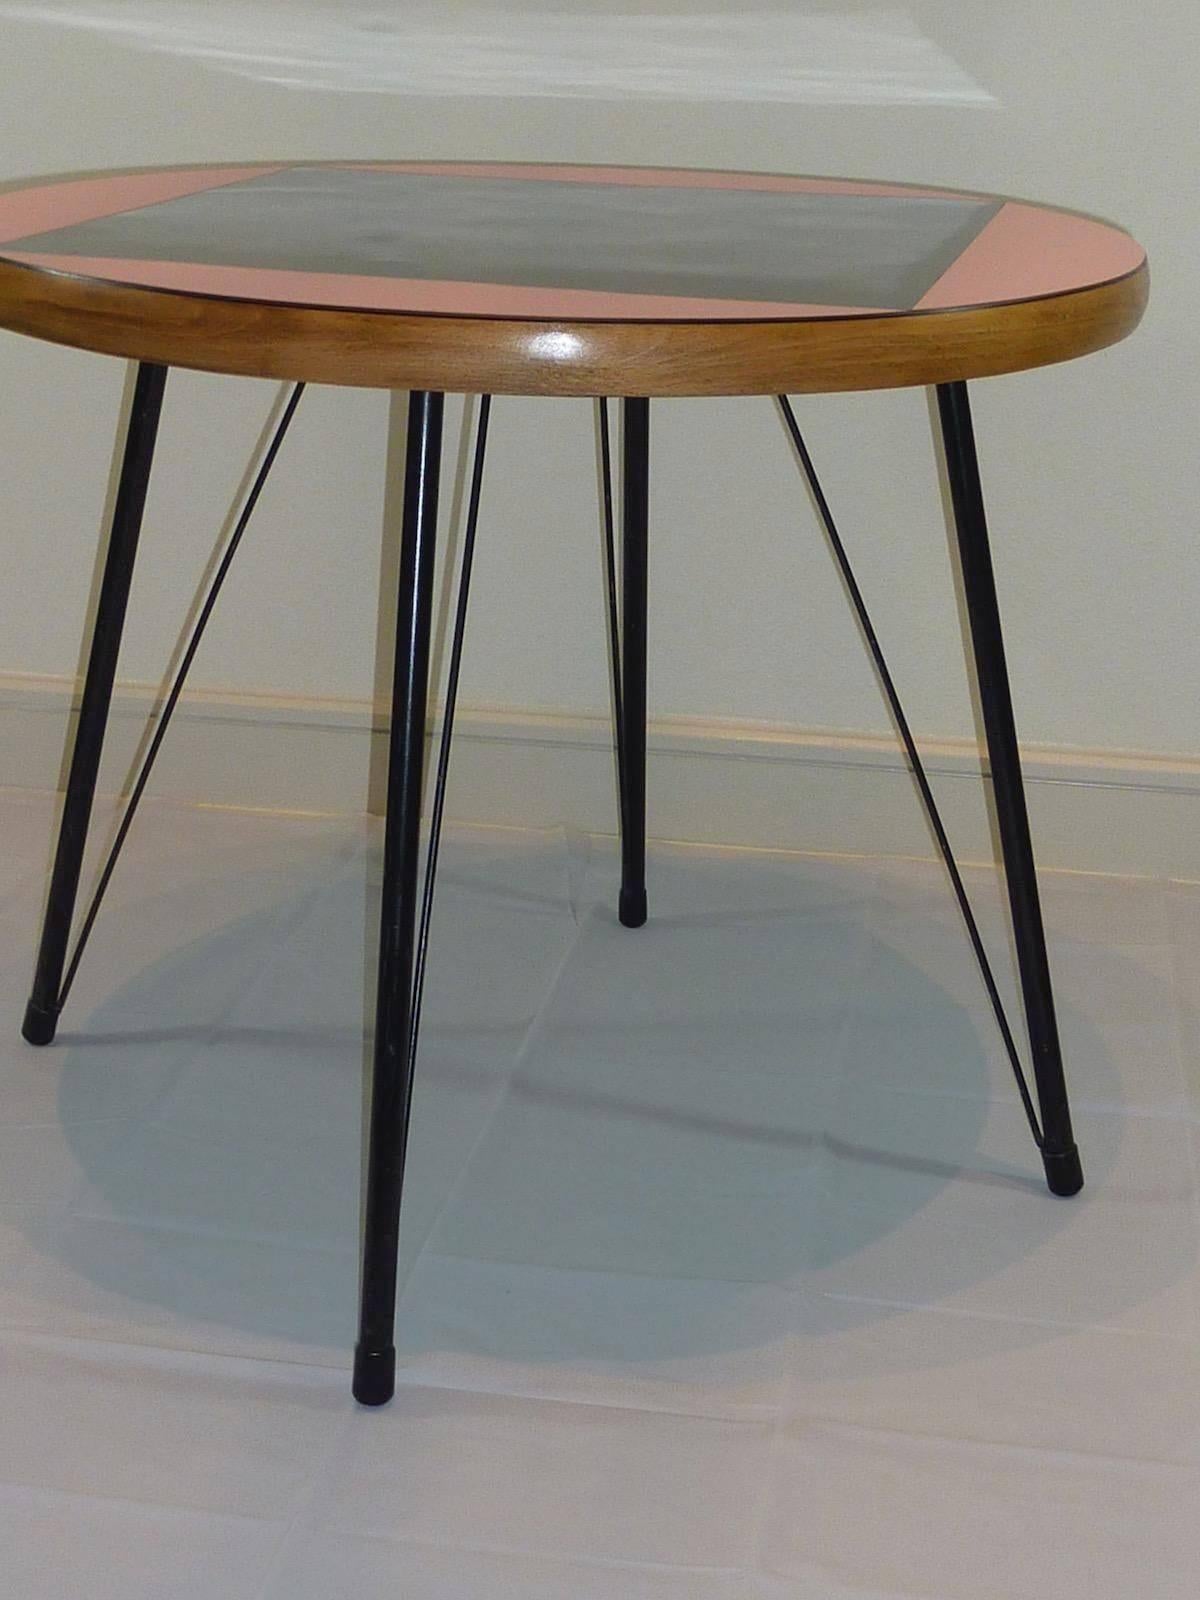 Petite Mid-Century dining table from the Rock a Billy Era. Made of small metal feet and a plywood tabletop. Colored in pink with a black inlay.